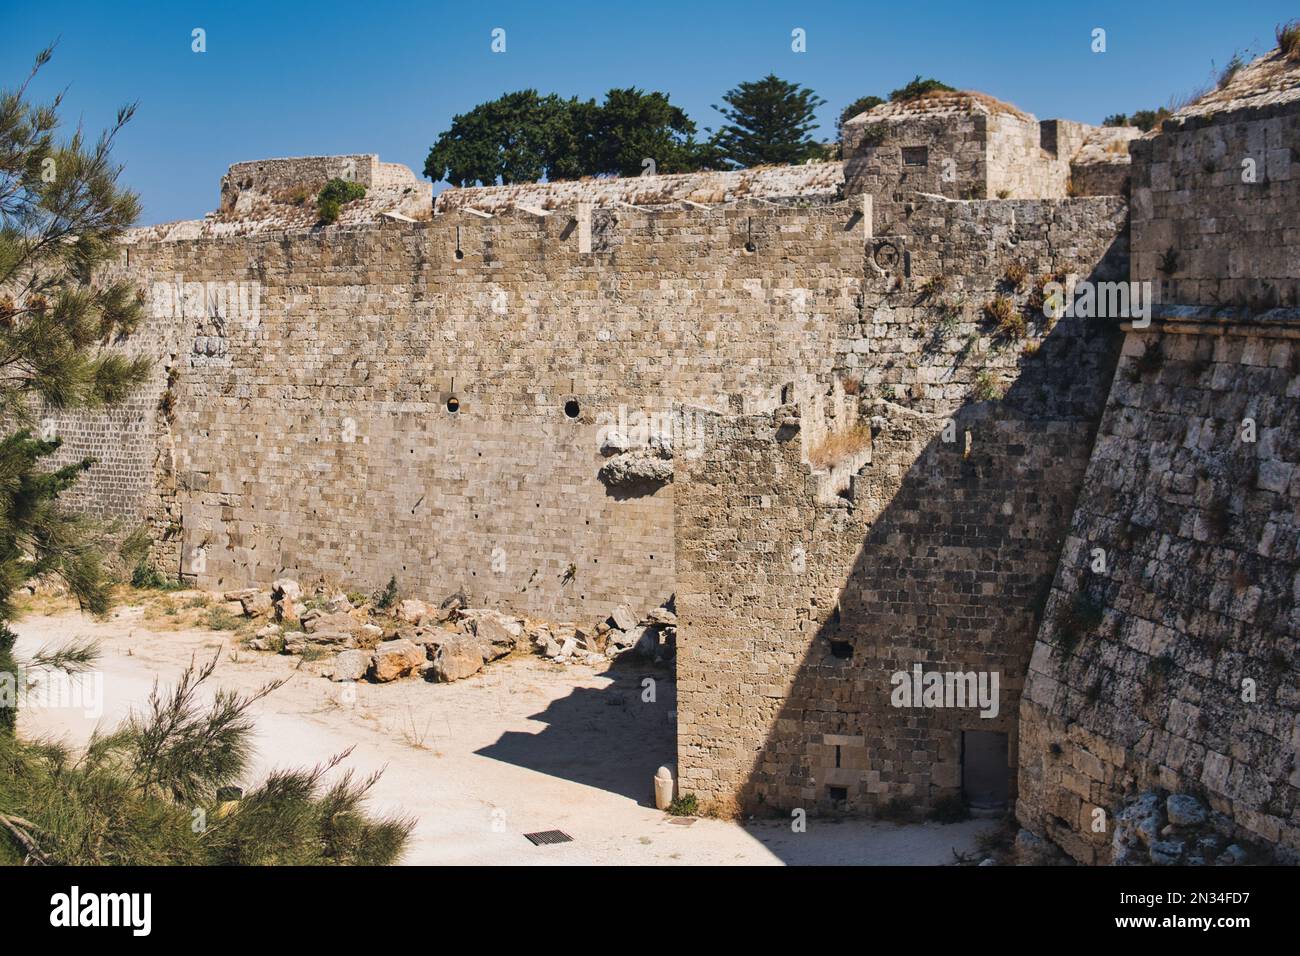 Walls and fortifications of the medieval citadel of Rhodes in Greece built by Hospitalliers Stock Photo